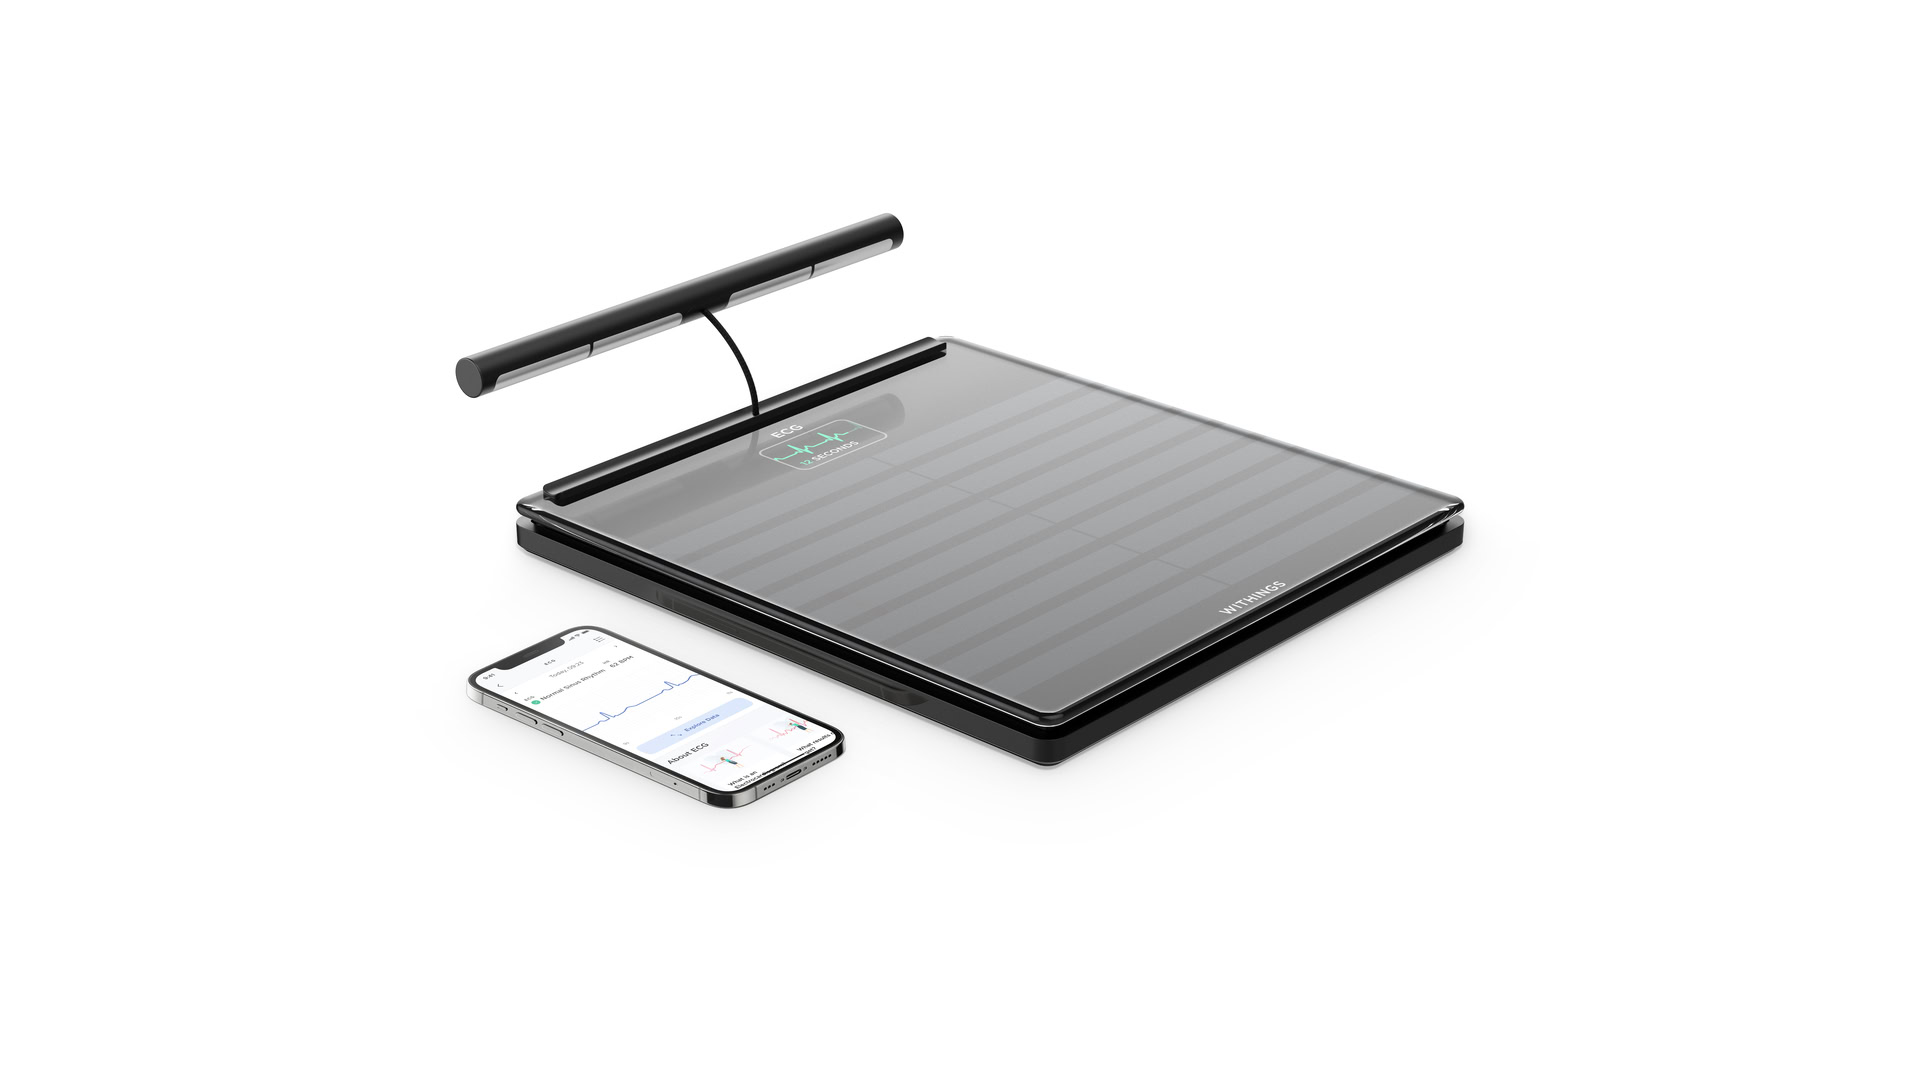 The Withings Body Scan smart scale measures ECG, body composition